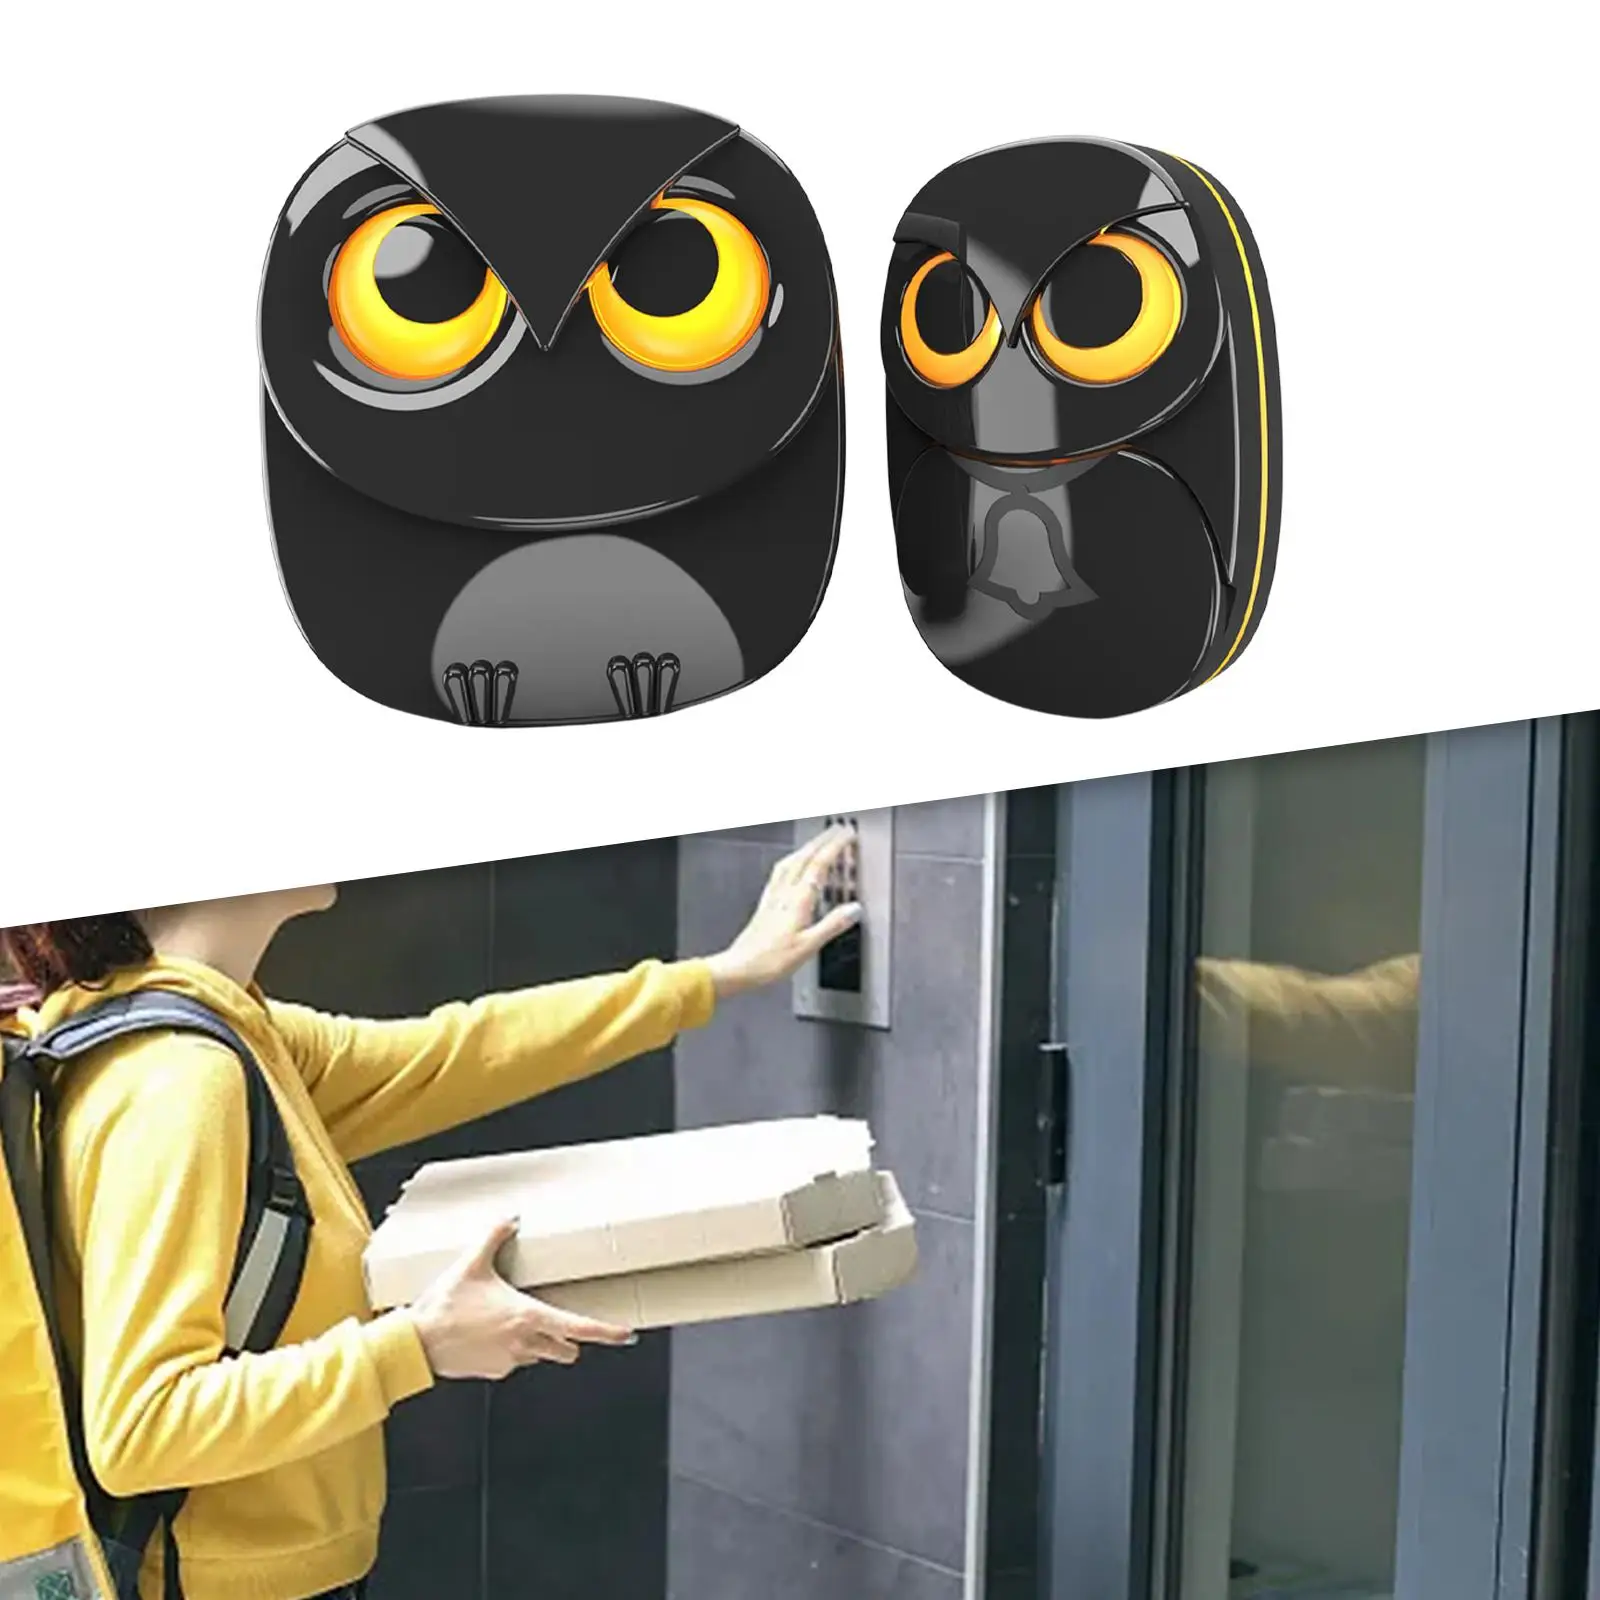 Wireless Driveway Security Alarm Convenient Cute Waterproof Accessories Decor Owl Shape for Front Porch Shed Garage Gate UK Plug